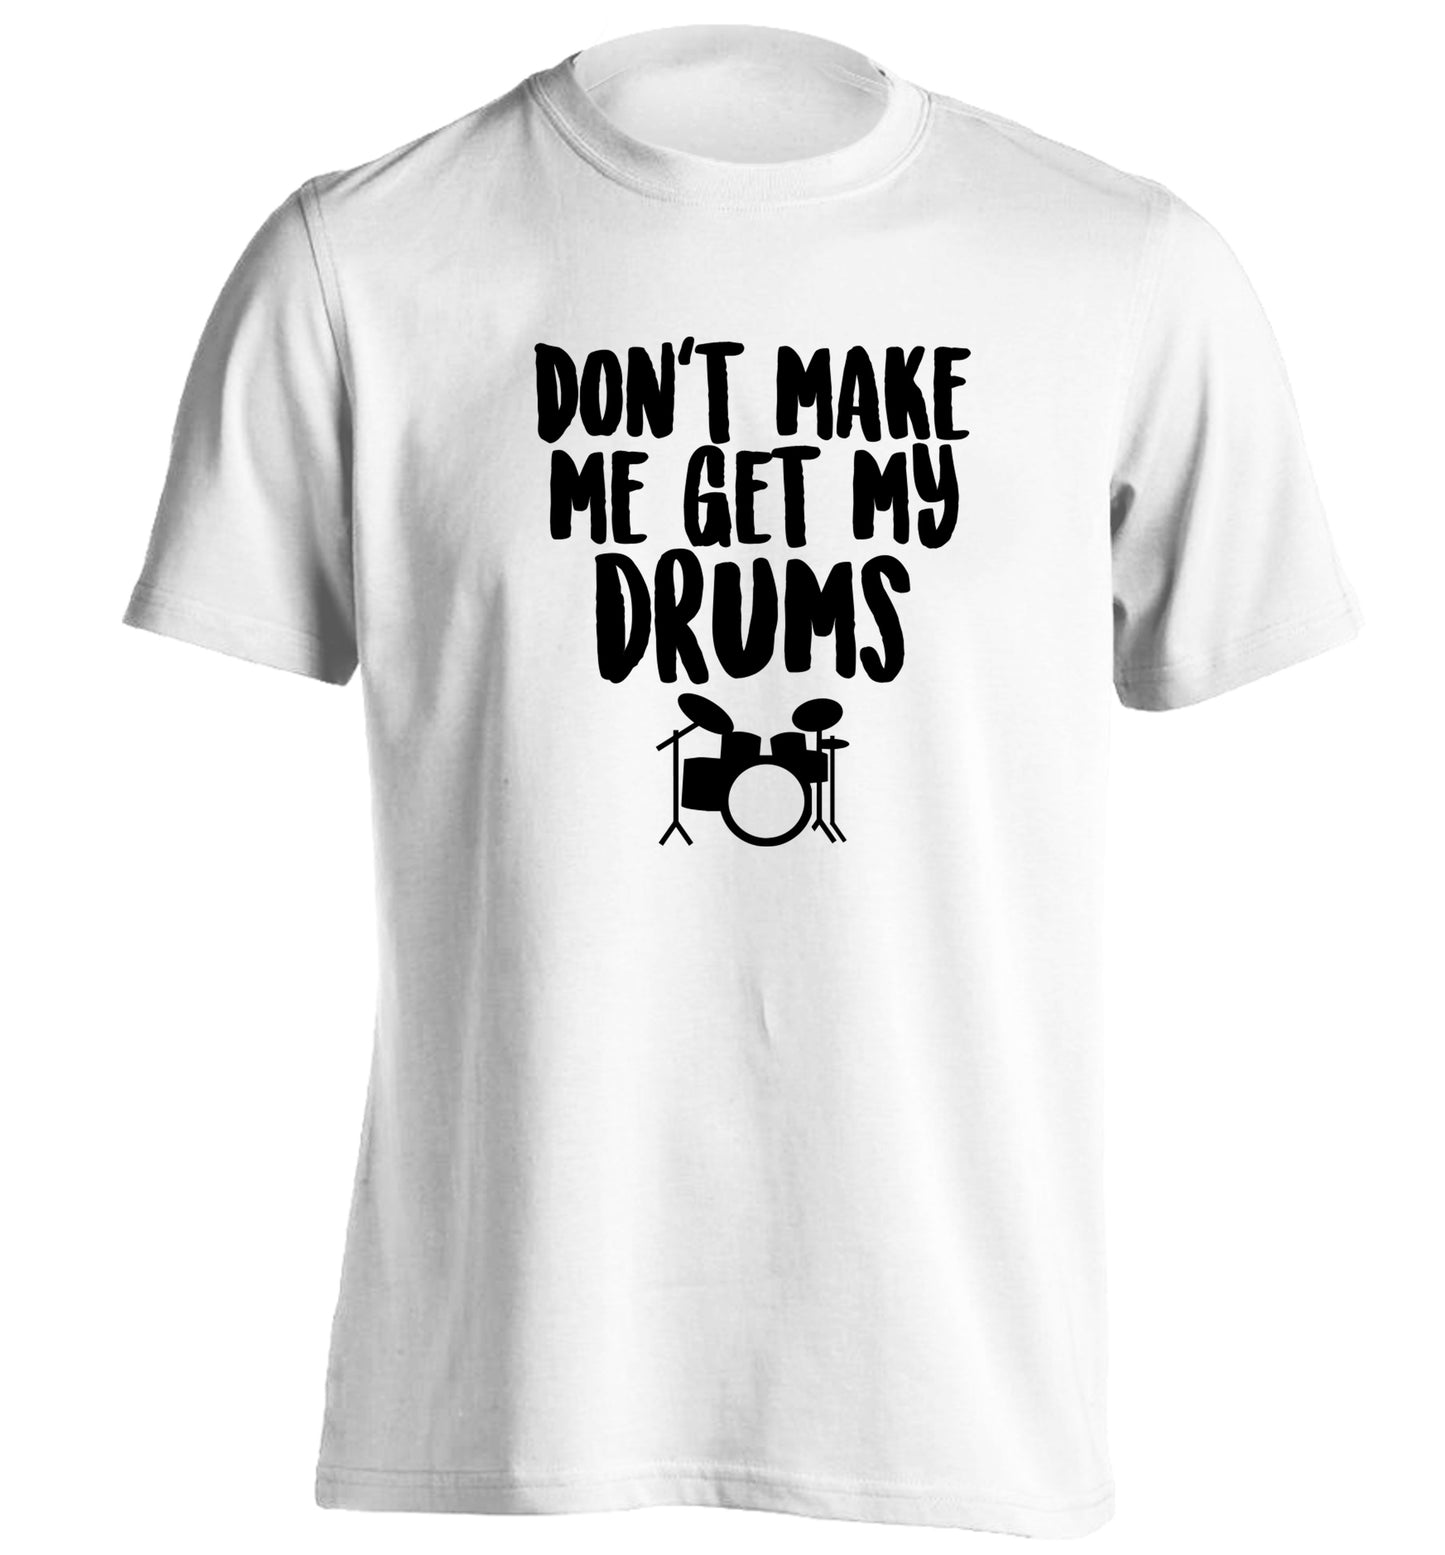 Don't make me get my drums adults unisex white Tshirt 2XL